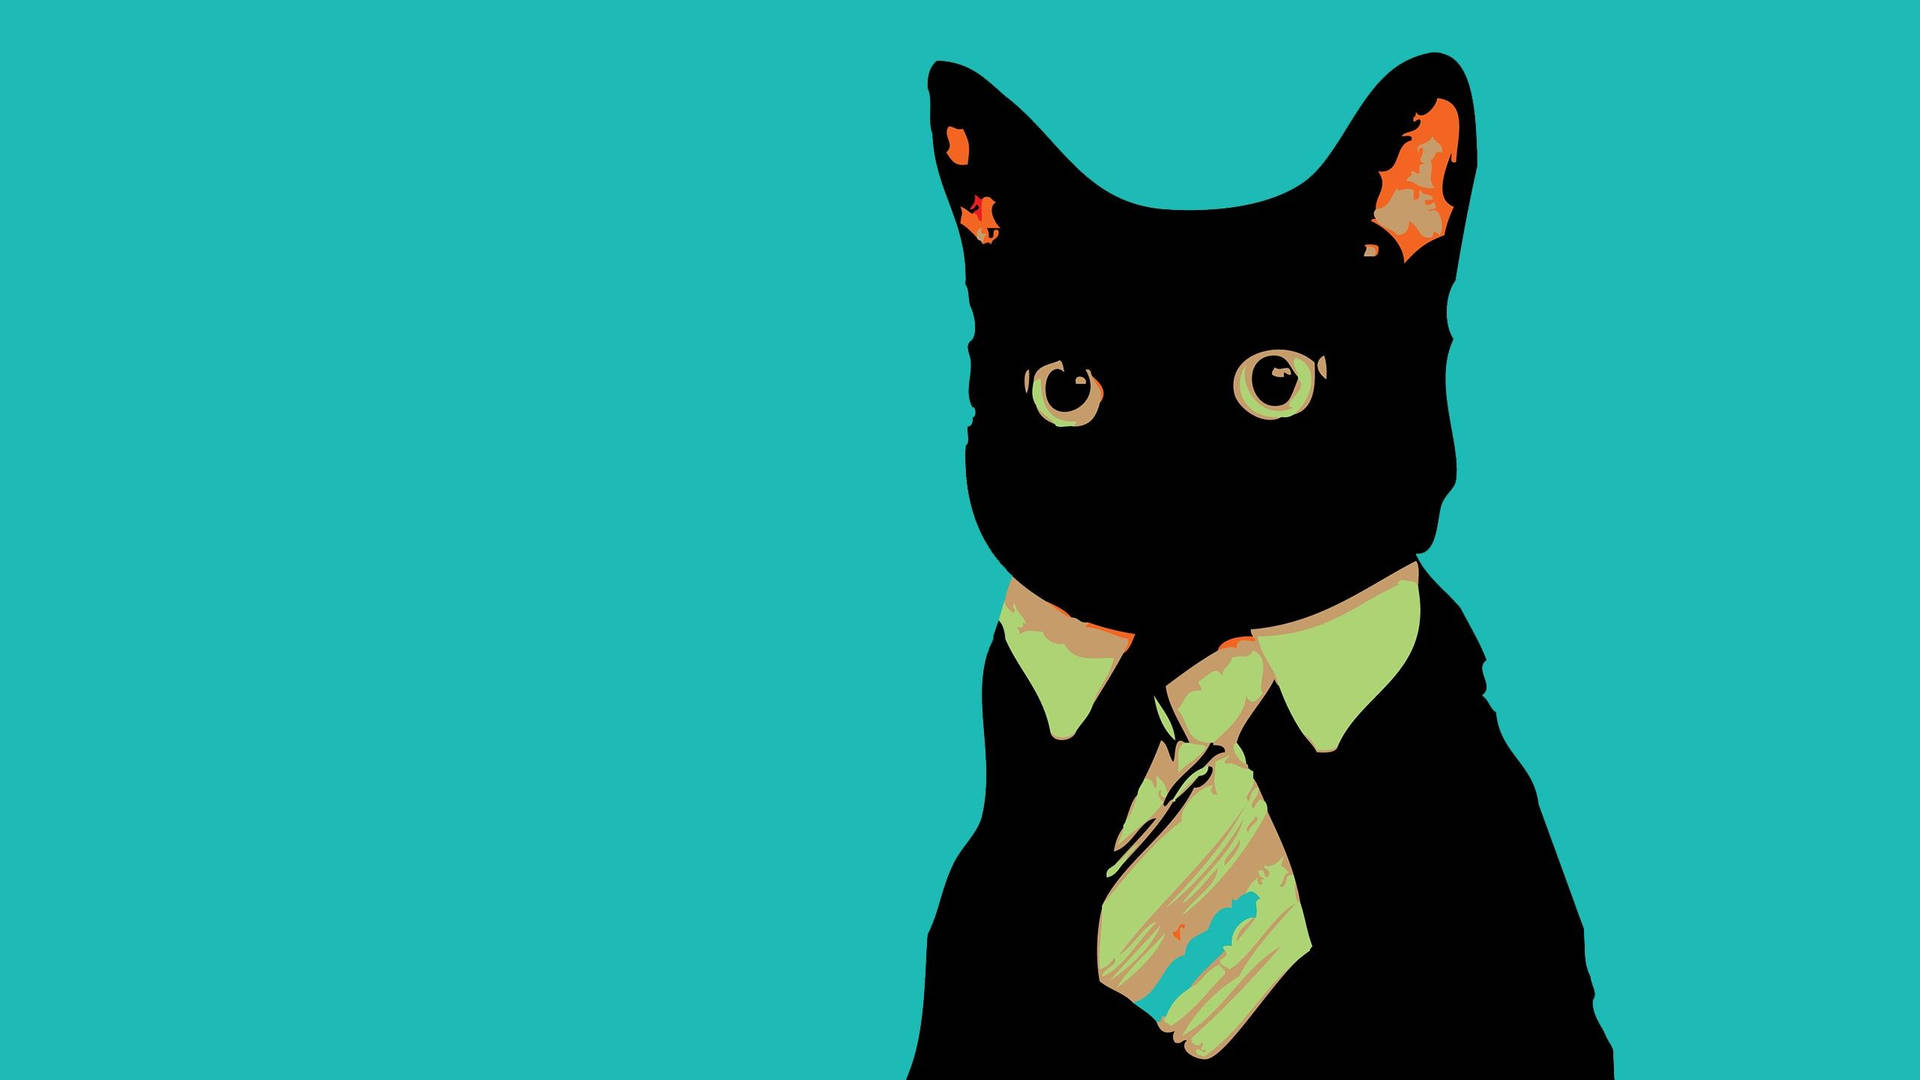 Black cat meme with business suit tie showing serious face on teal blue background.